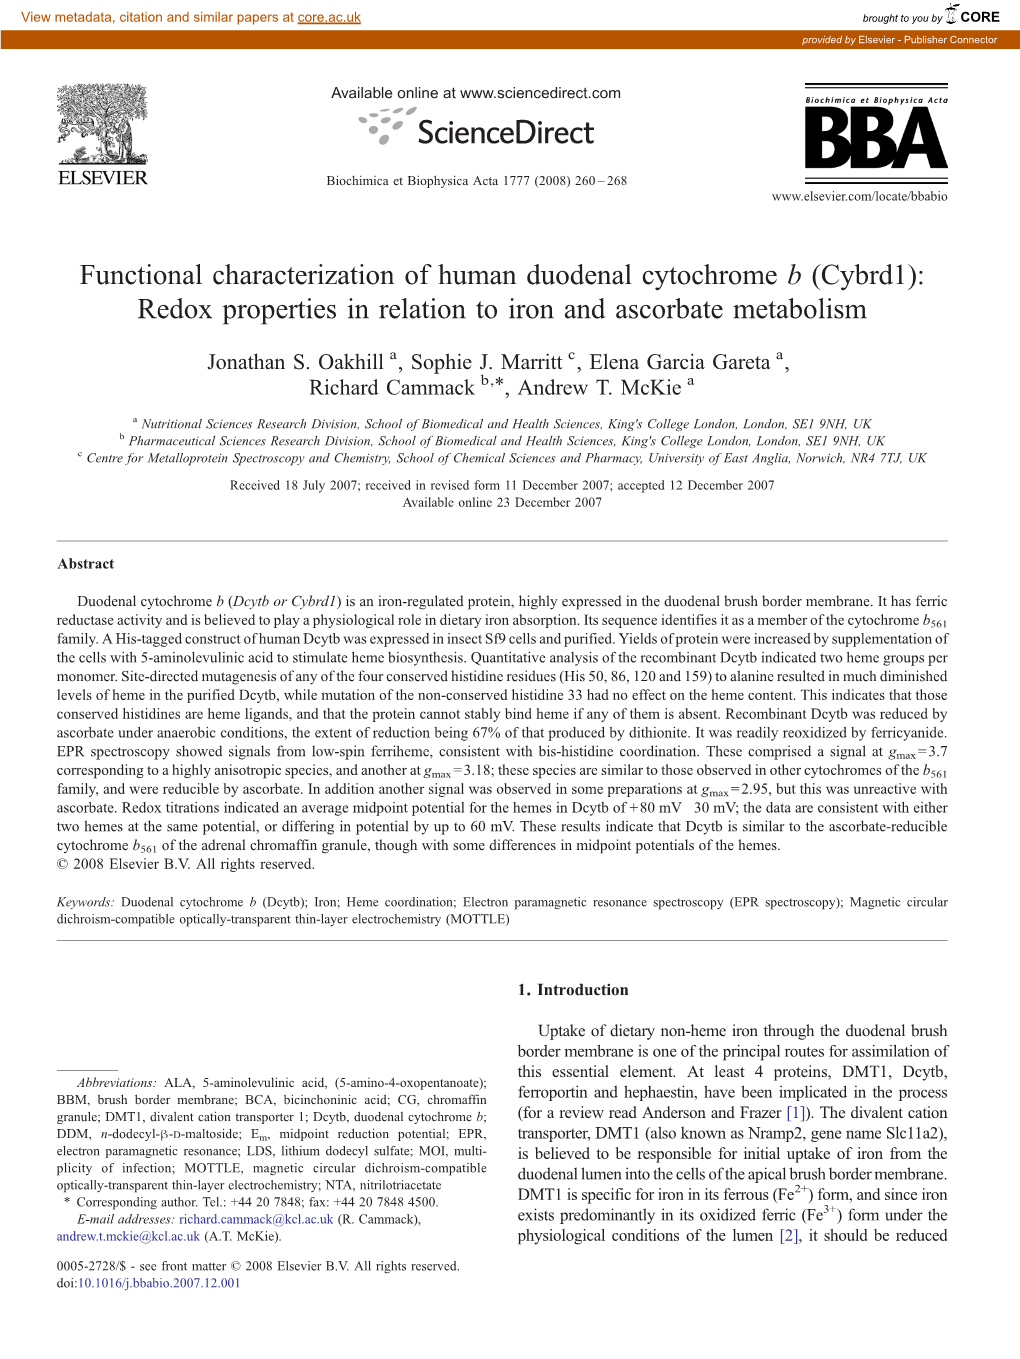 Functional Characterization of Human Duodenal Cytochrome B (Cybrd1): Redox Properties in Relation to Iron and Ascorbate Metabolism